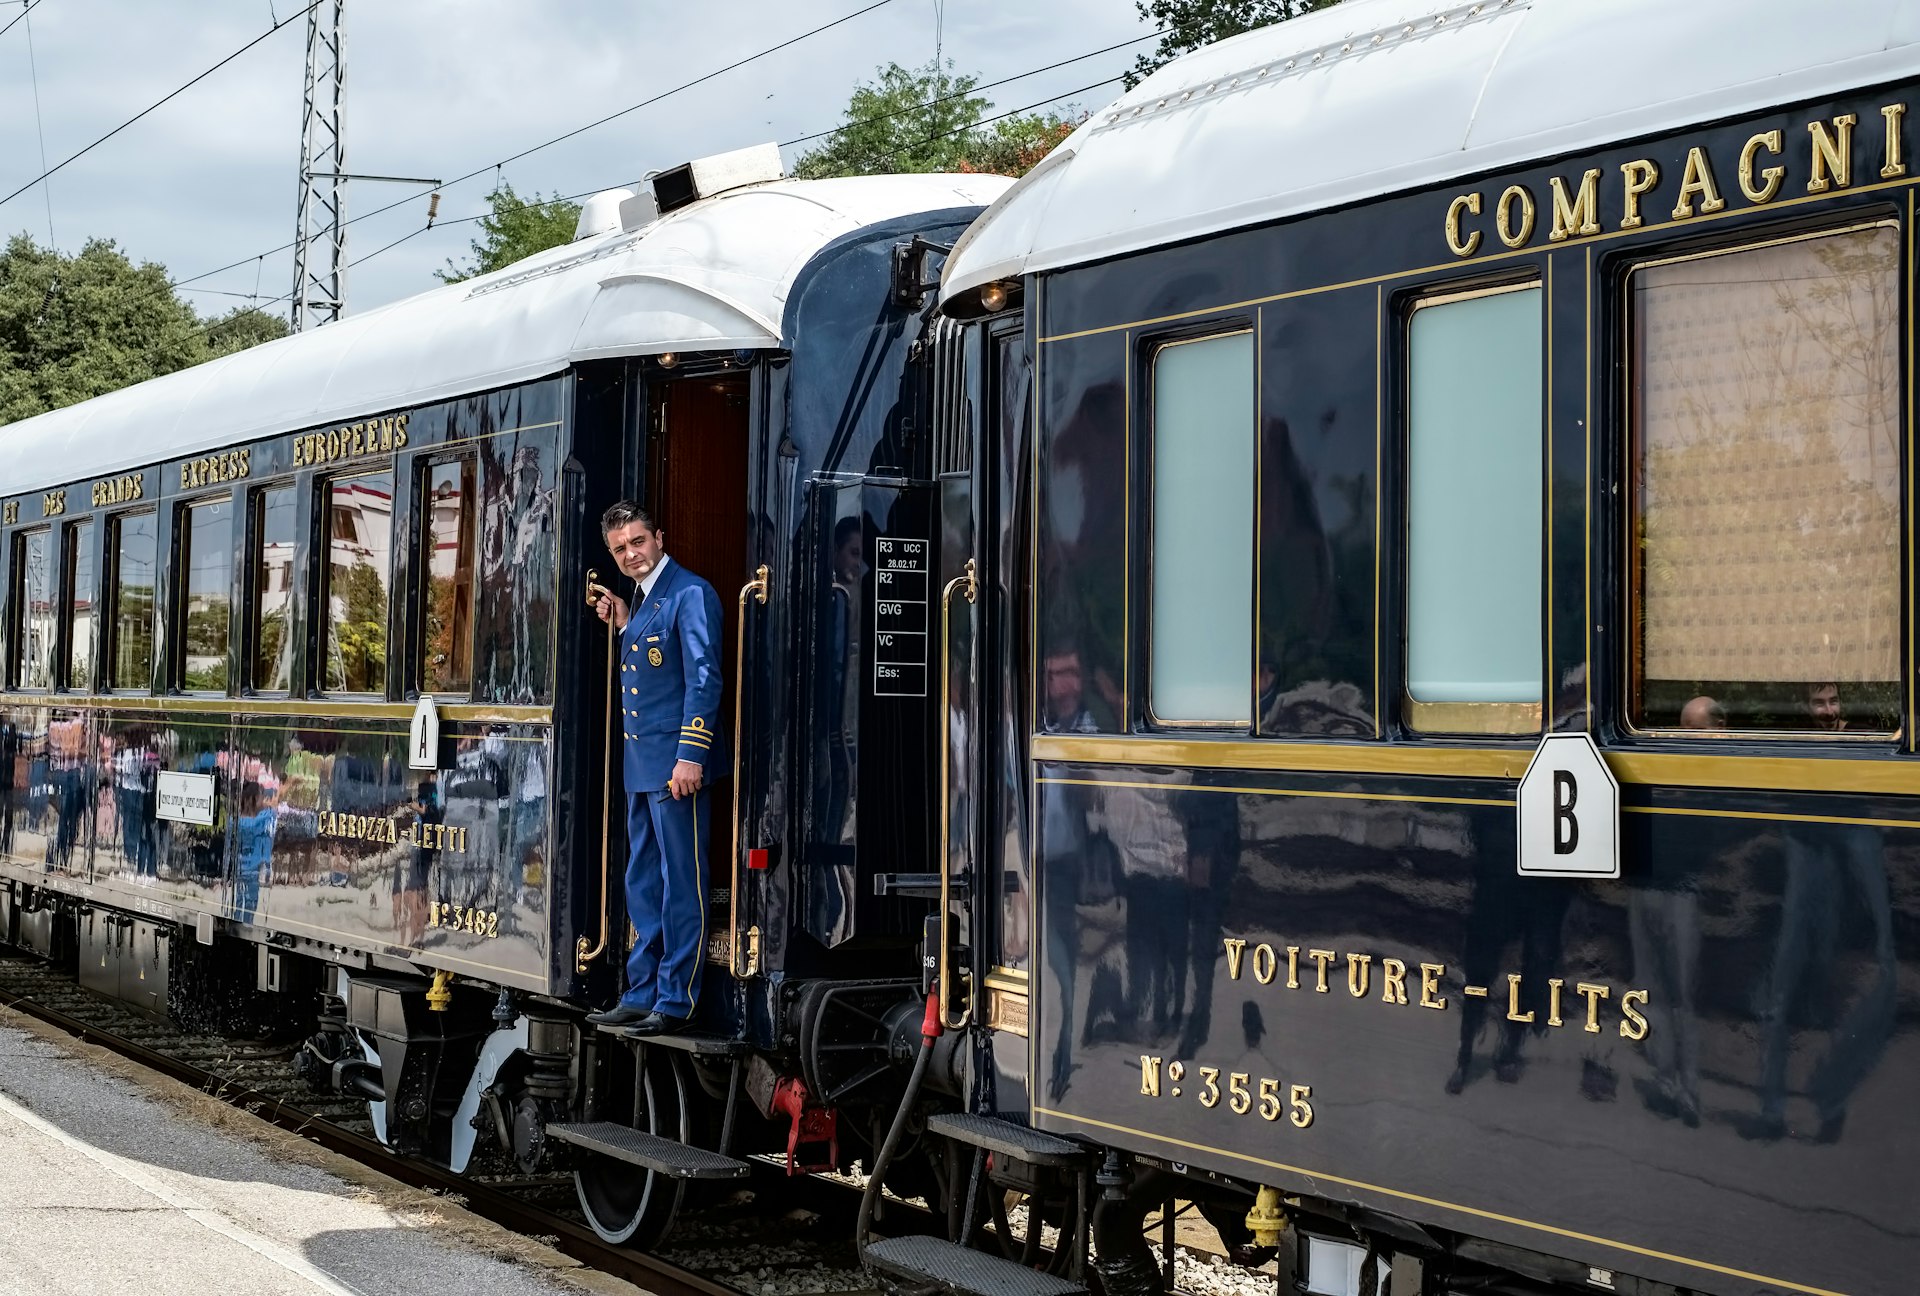 the legendary Venice Simplon Orient Express is ready to depart from Ruse Railway station